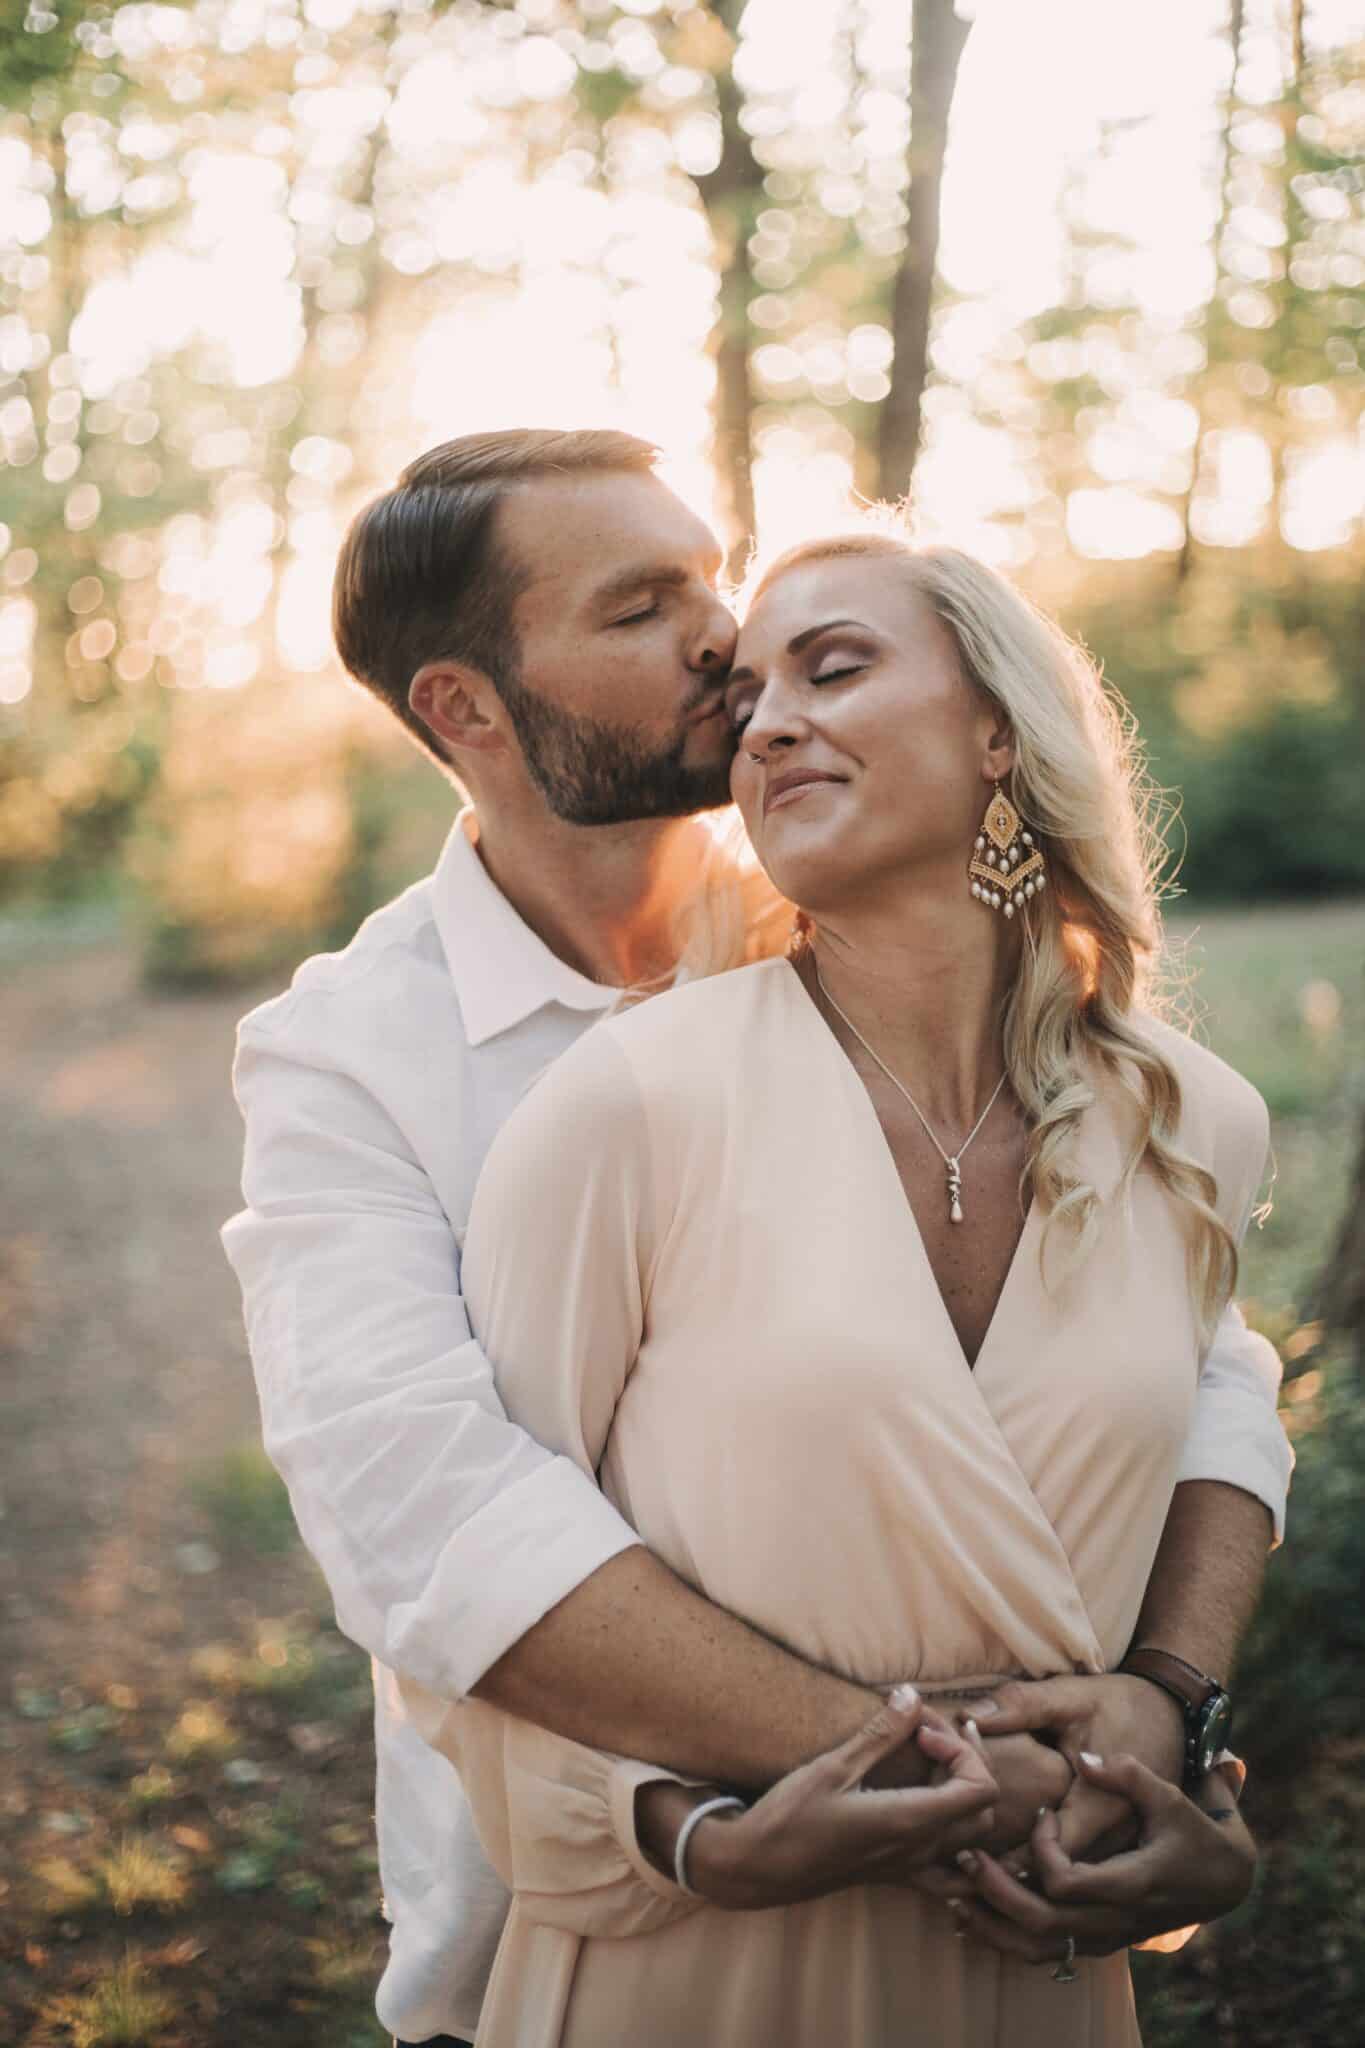 groom to be kissing his bride to be's forhead in the woods after their staycation marriage proposal